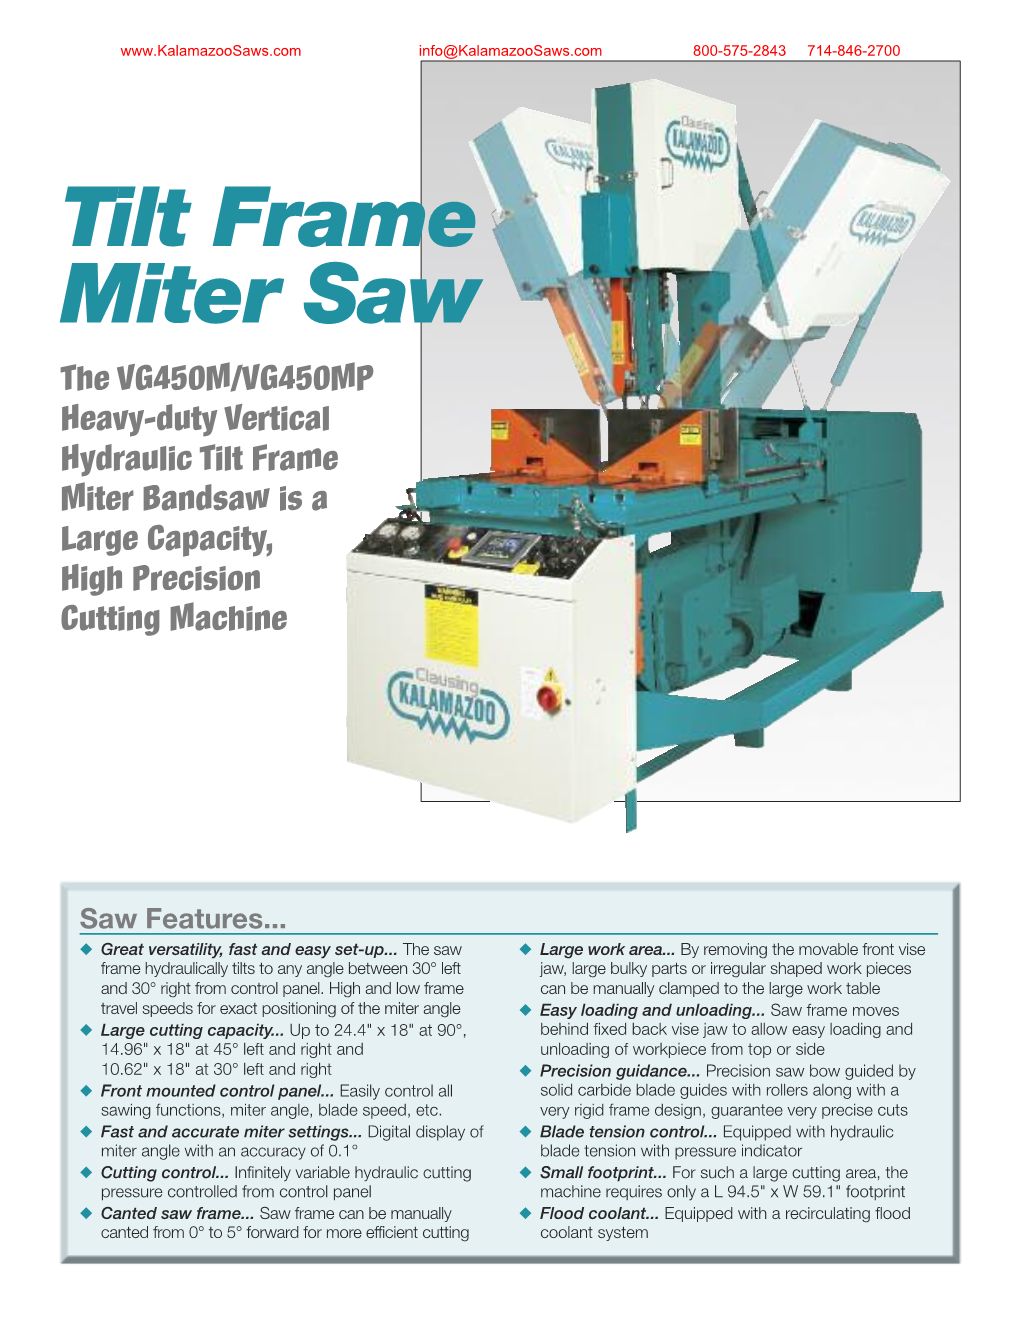 Tilt Frame Miter Saw the VG450M/VG450MP Heavy-Duty Vertical Hydraulic Tilt Frame Miter Bandsaw Is a Large Capacity, High Precision Cutting Machine